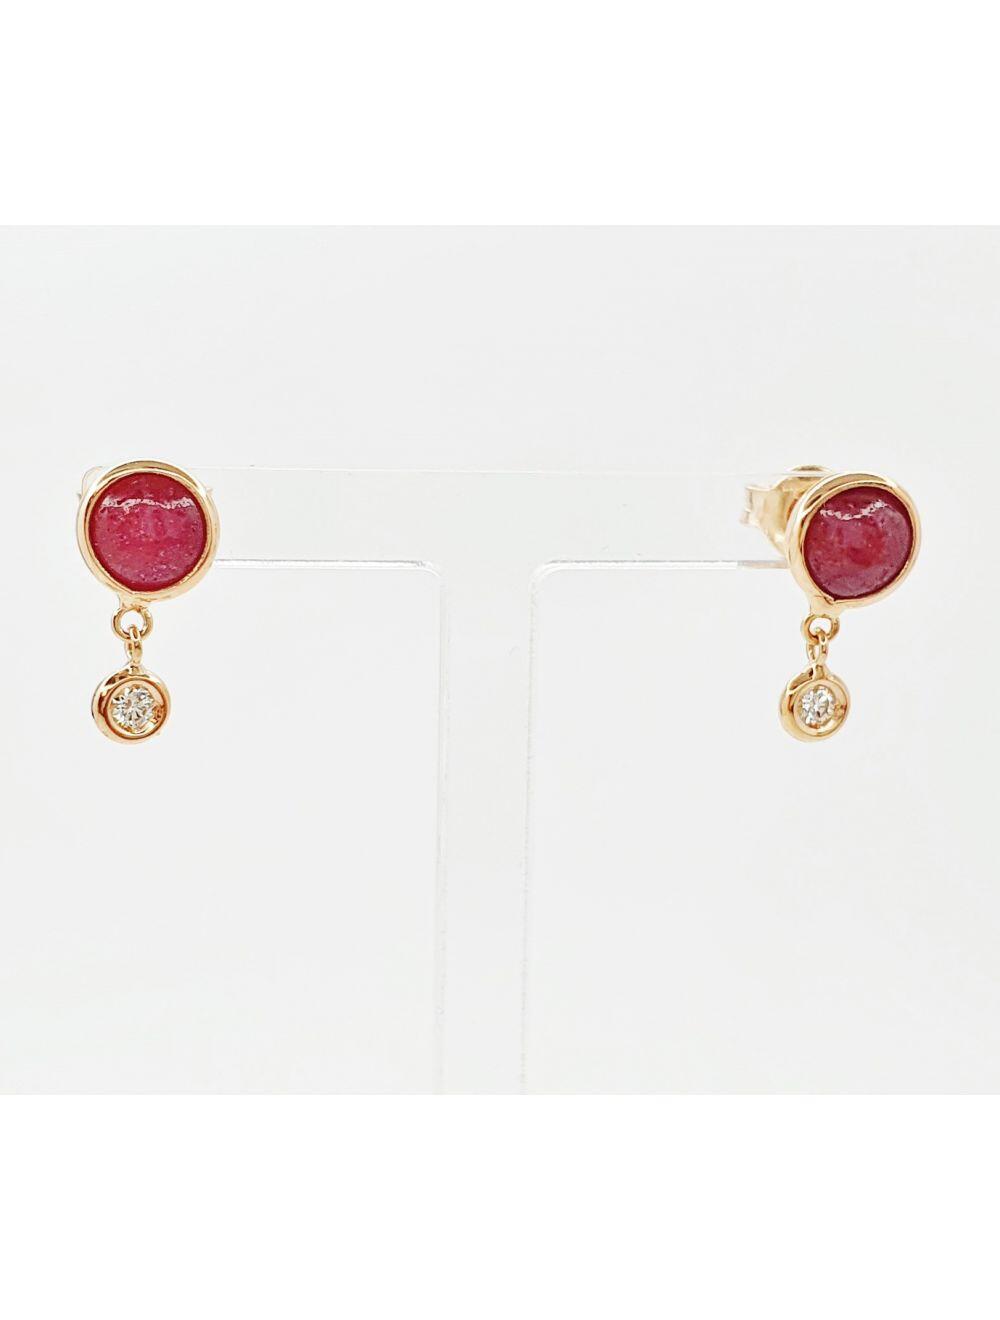 # Rose gold earrings with ruby and 0.07ct natural diamonds